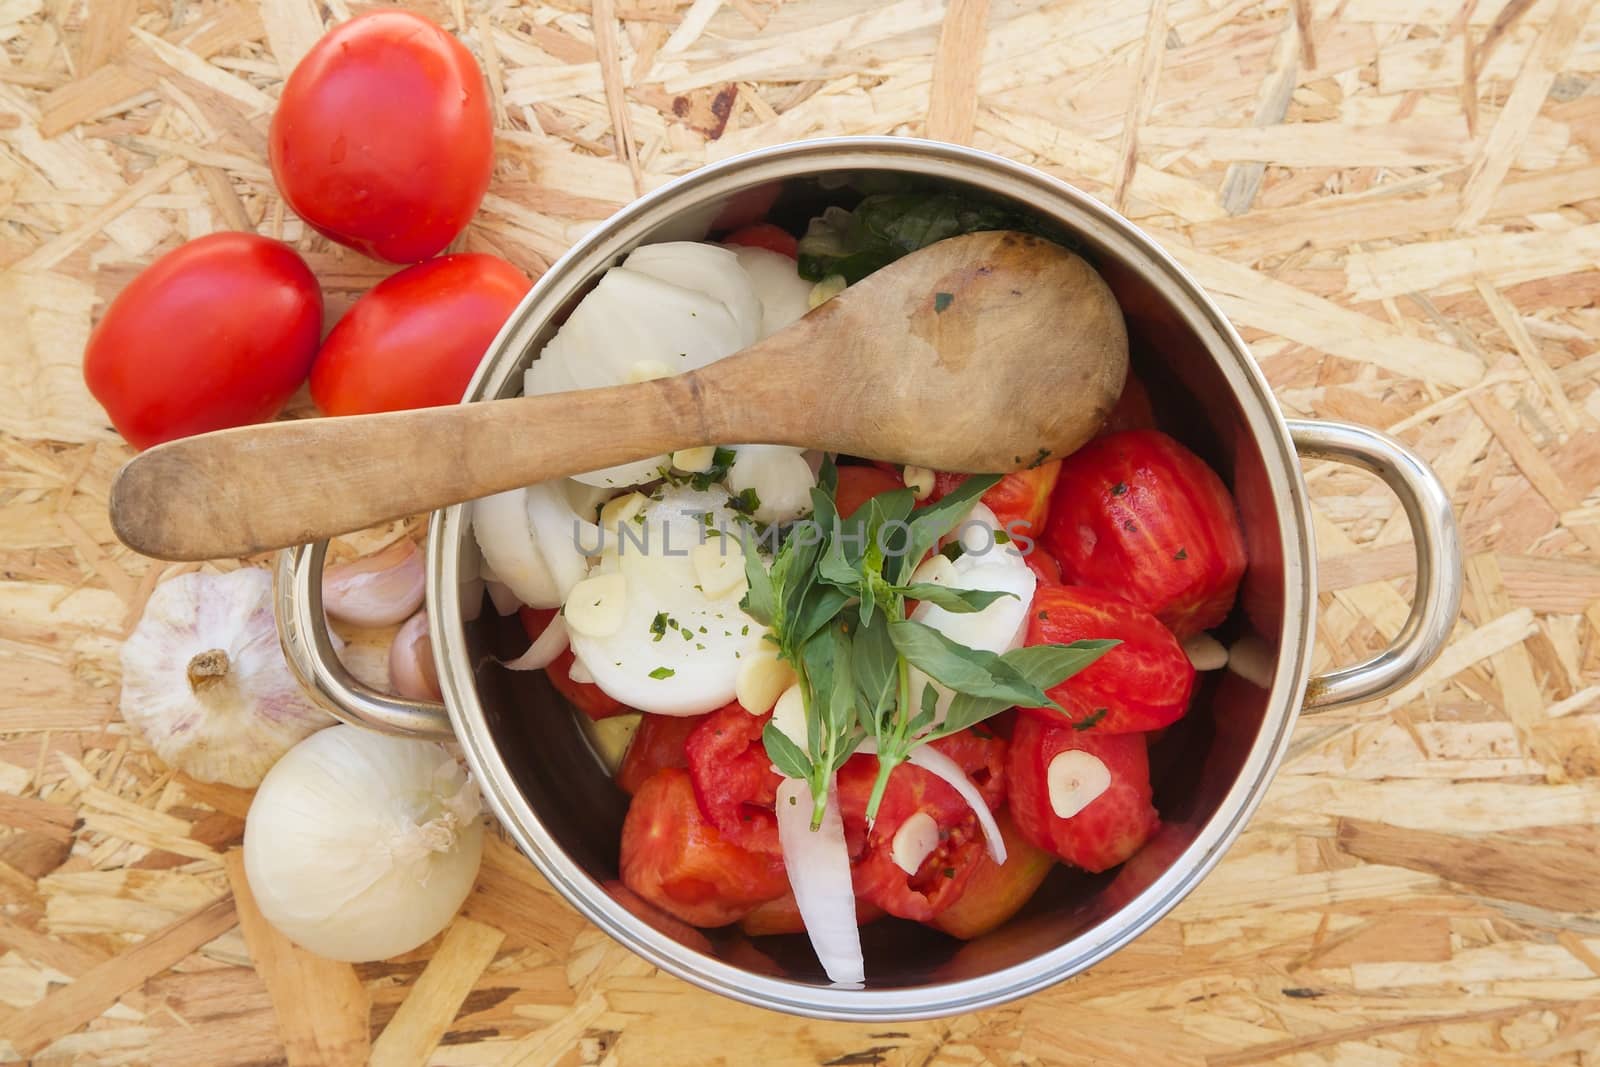 Prepared food ingredients for cooking Italian tomato sauce - salsa. Ingredients are placed in the pot which is on the wooden surface